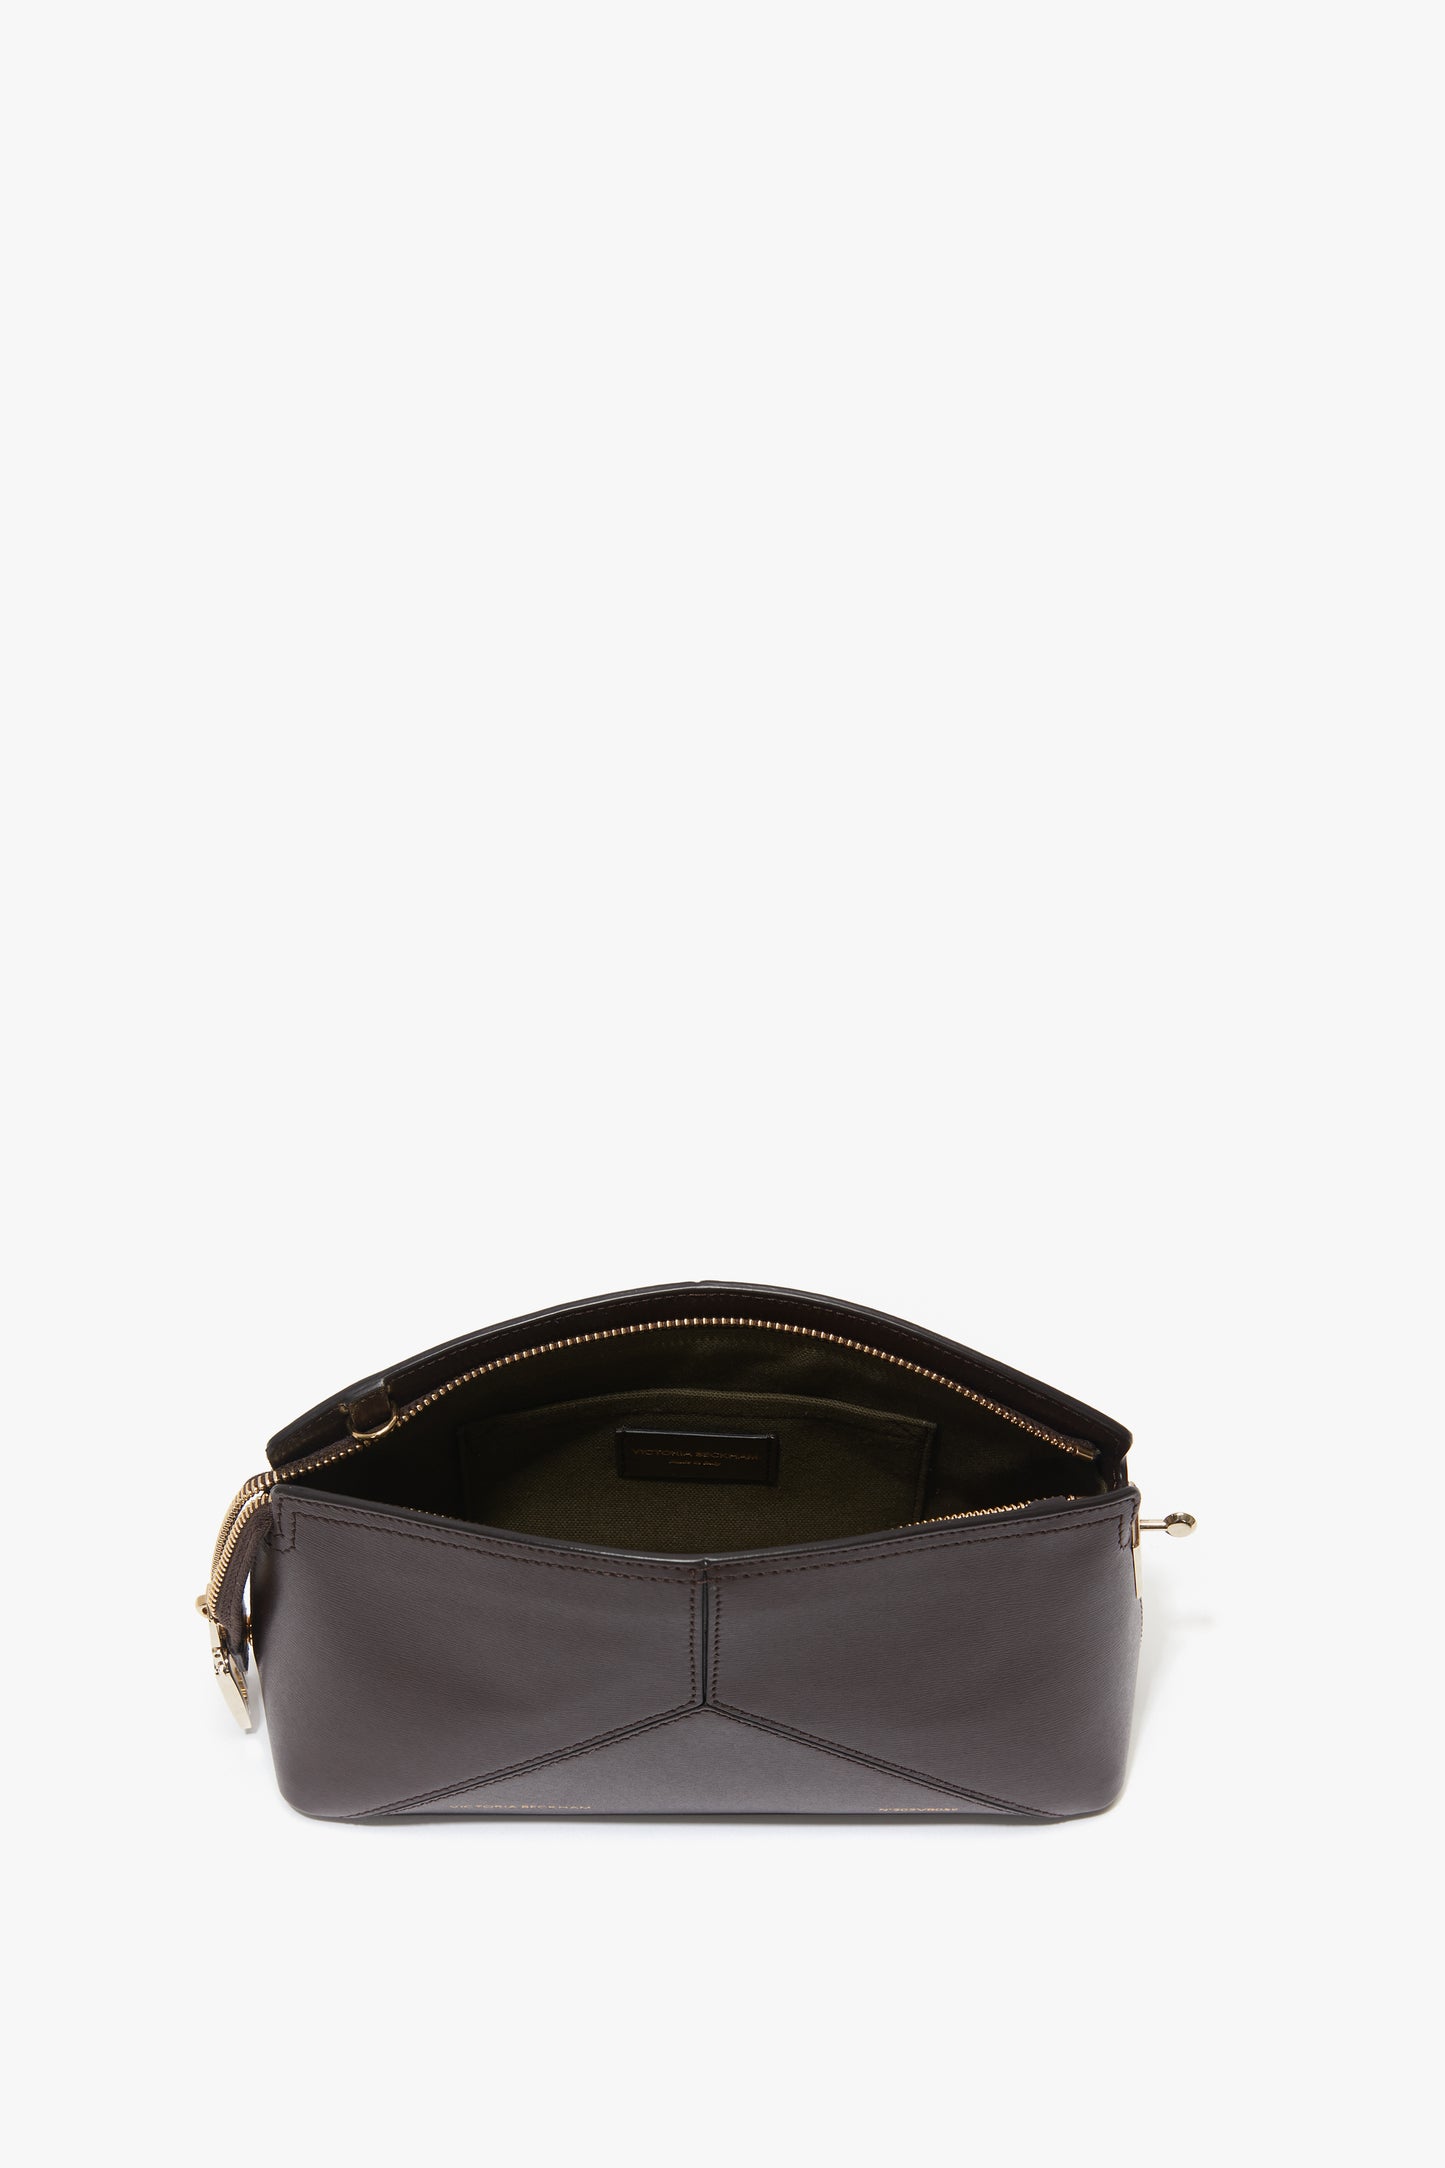 The Exclusive Victoria Crossbody Bag In Brown Leather by Victoria Beckham is a dark brown handbag crafted from premium calf leather, featuring a zipper opening that reveals a spacious interior with fabric lining and an adjustable strap for versatile wear.